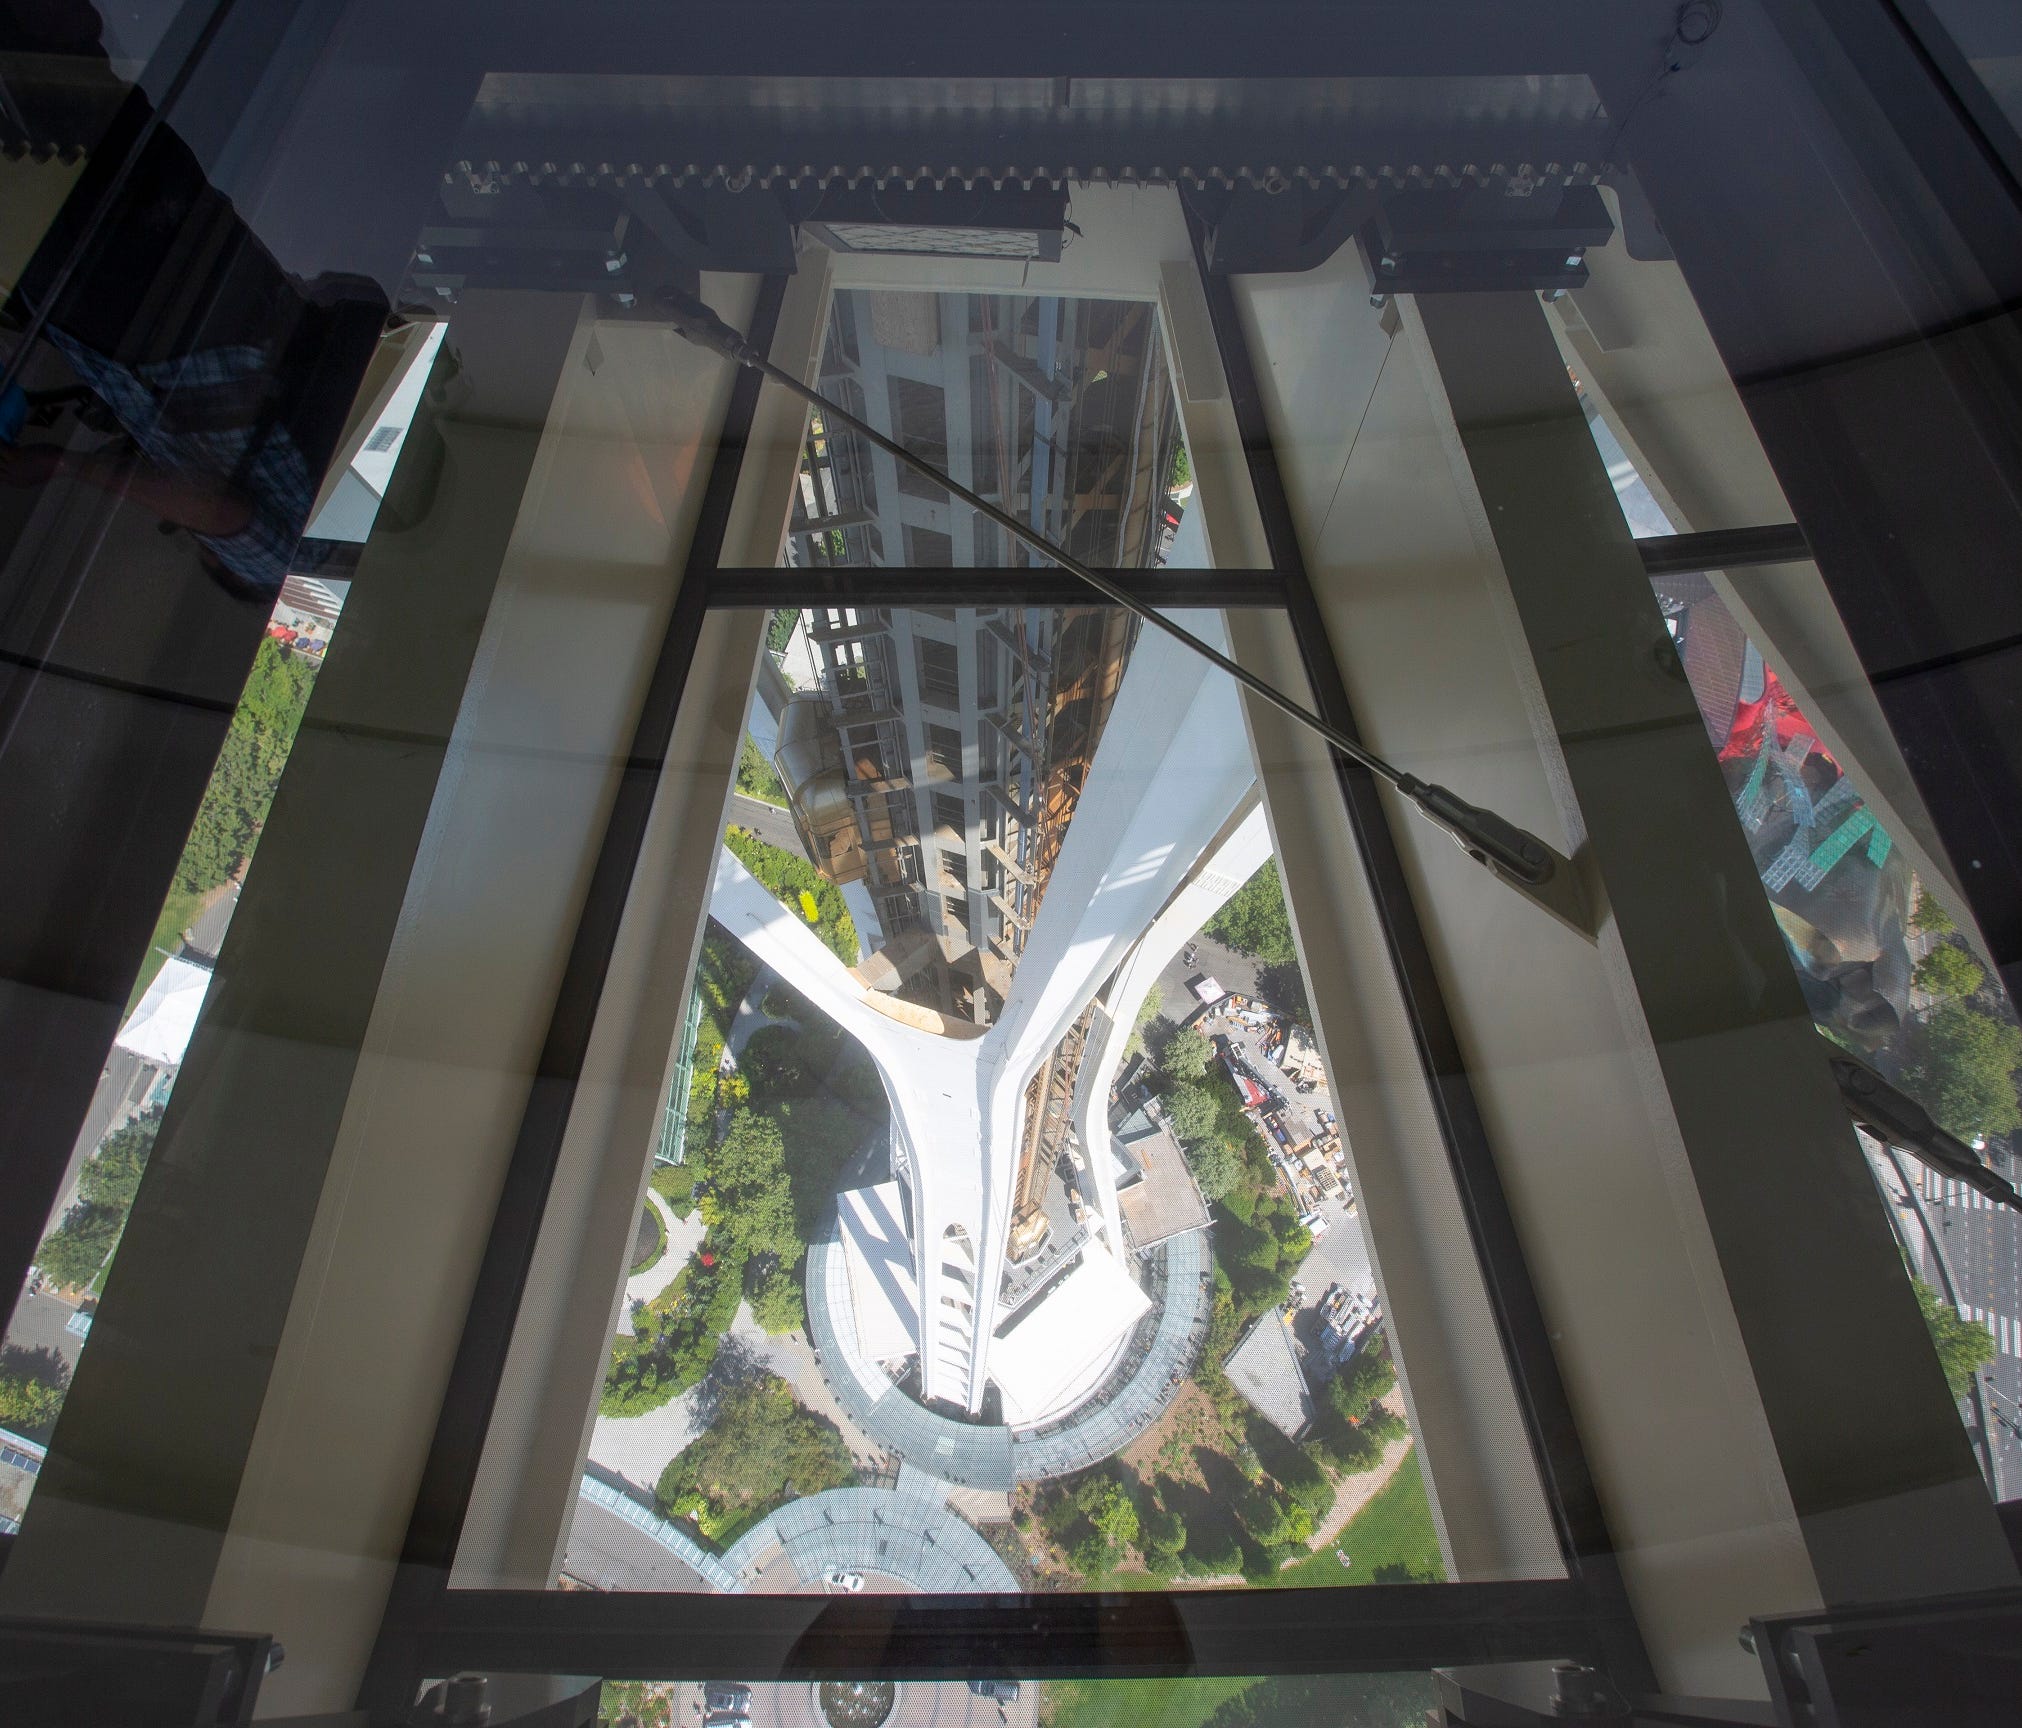 A view through the Space Needle's glass floor.